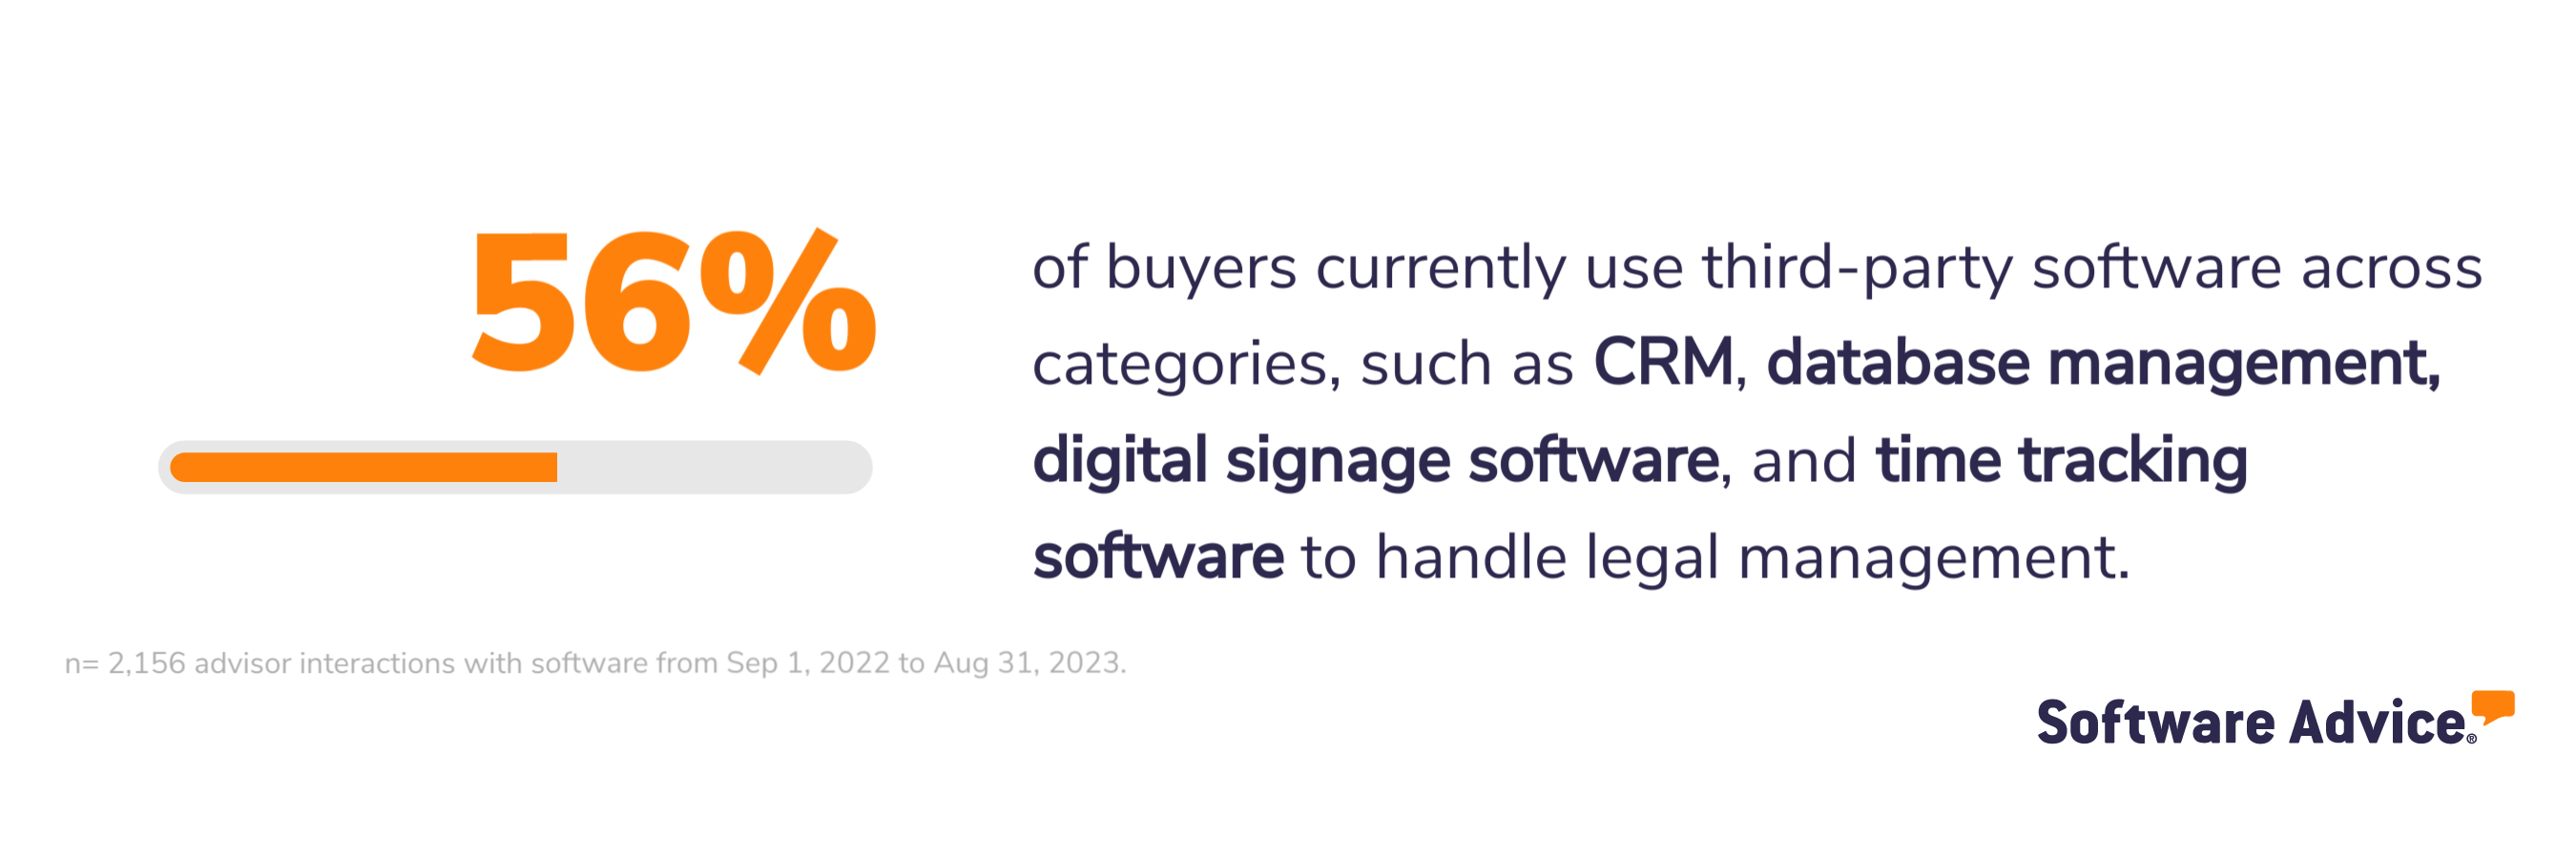 SA graphic: 56% of buyers use third-party software across categories such as CRM, database management, and time tracking software for legal management.